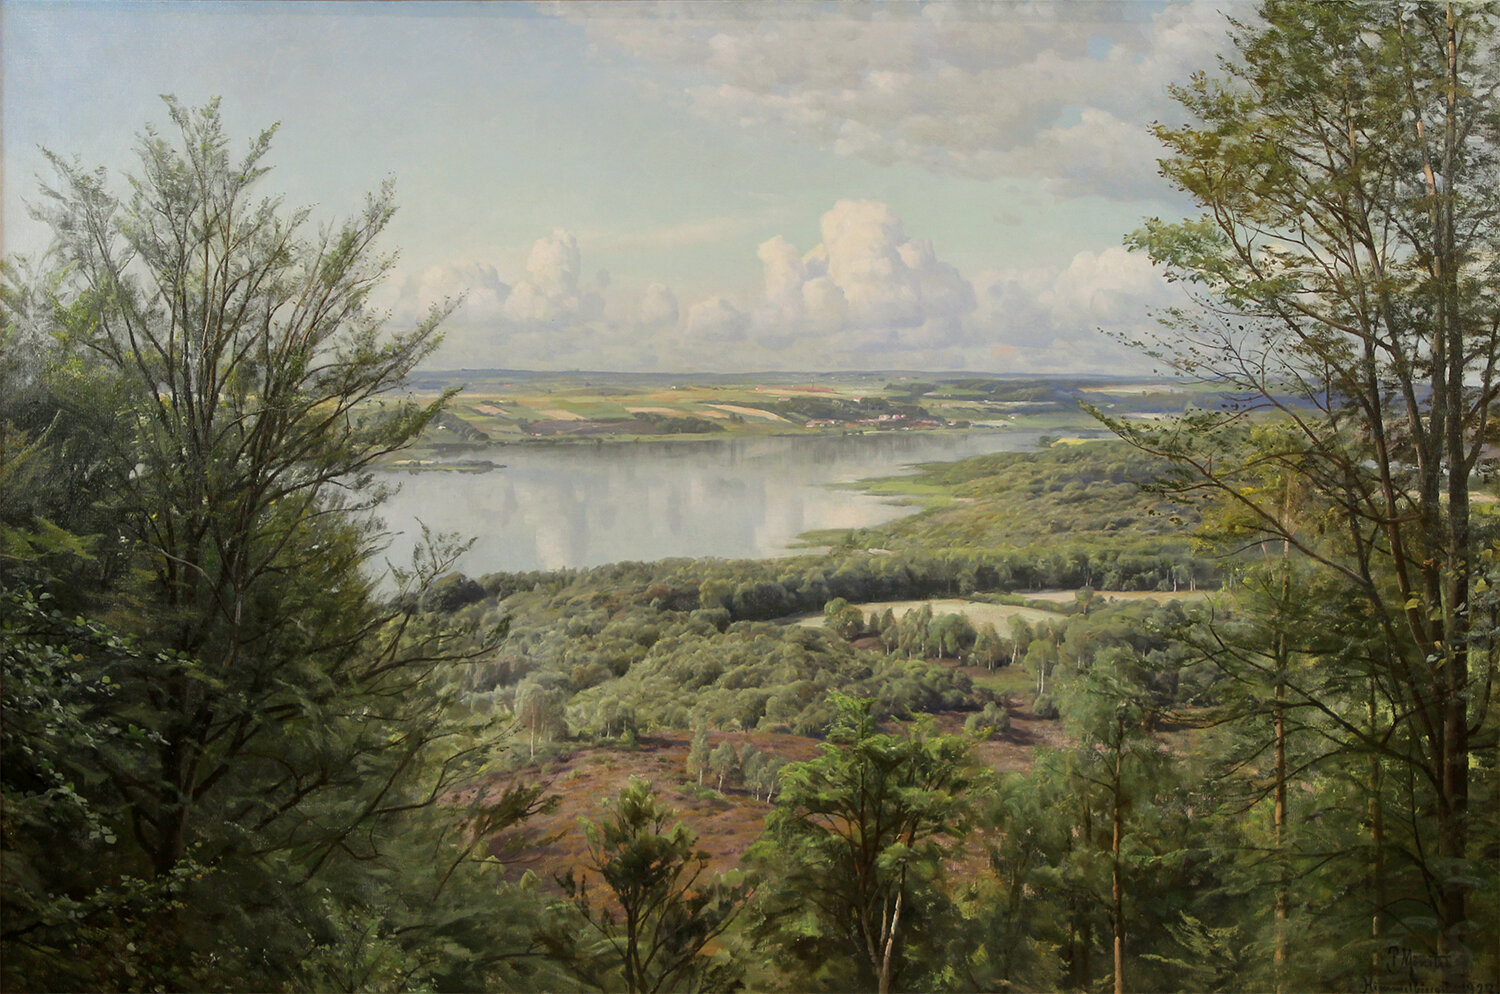 Peder M. Monsted (Danish 1859-1941) 'View Over Juul Lake'